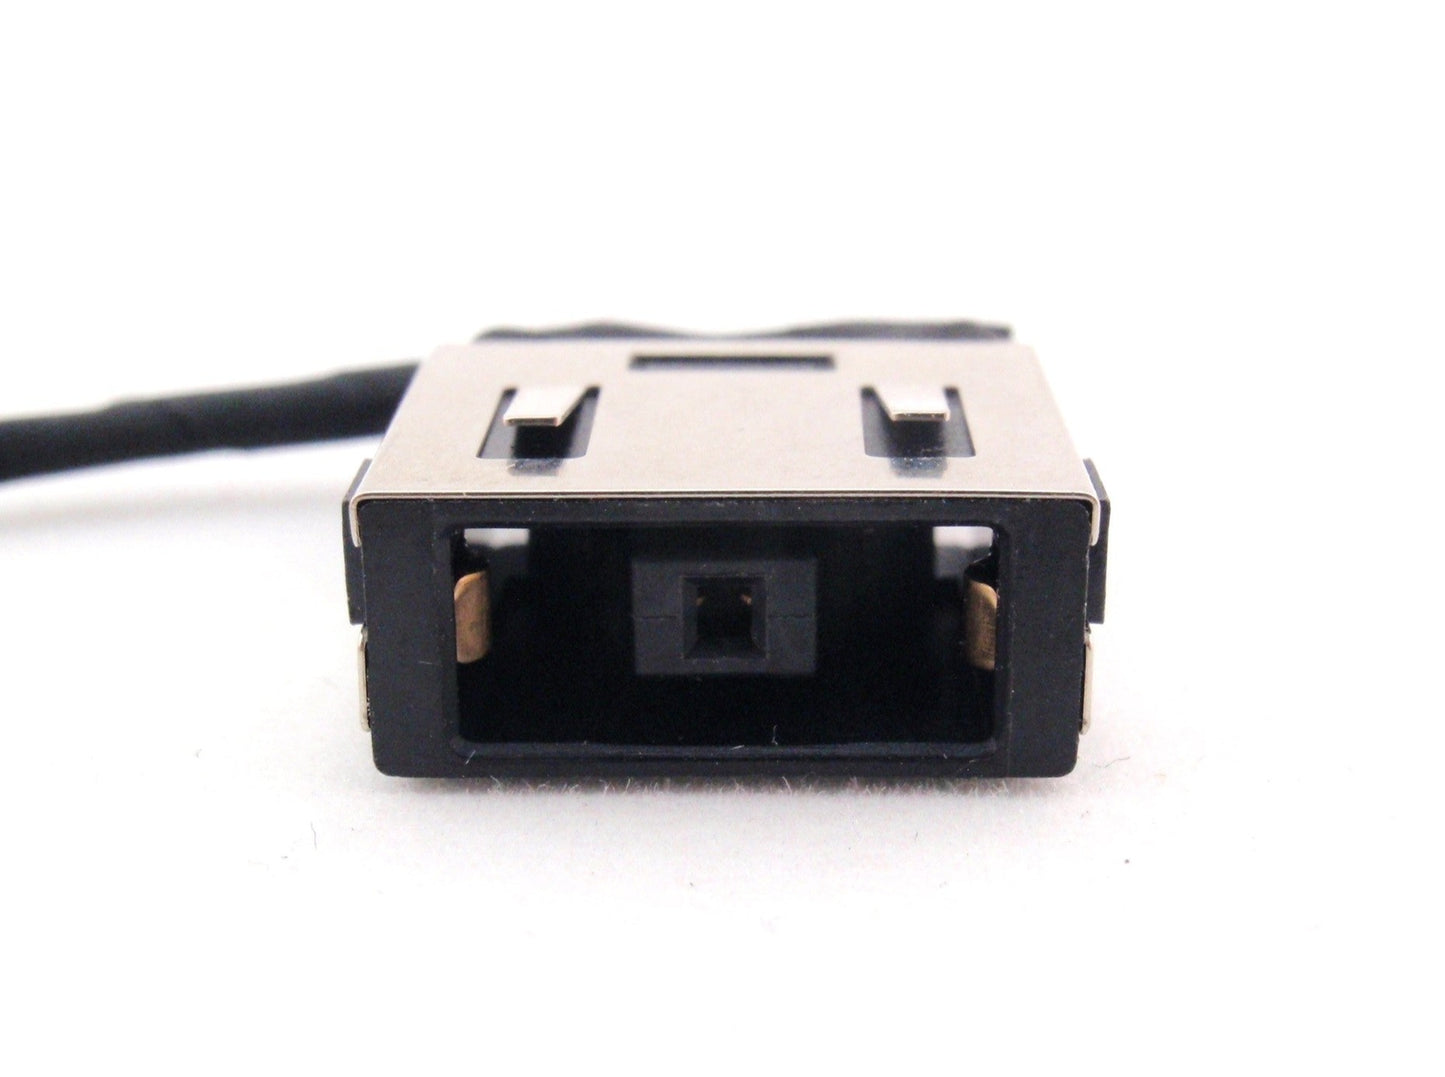 Lenovo New DC In Power Jack Charging Port Connector Socket Cable IdeaPad V530S 3nod 64411204800040